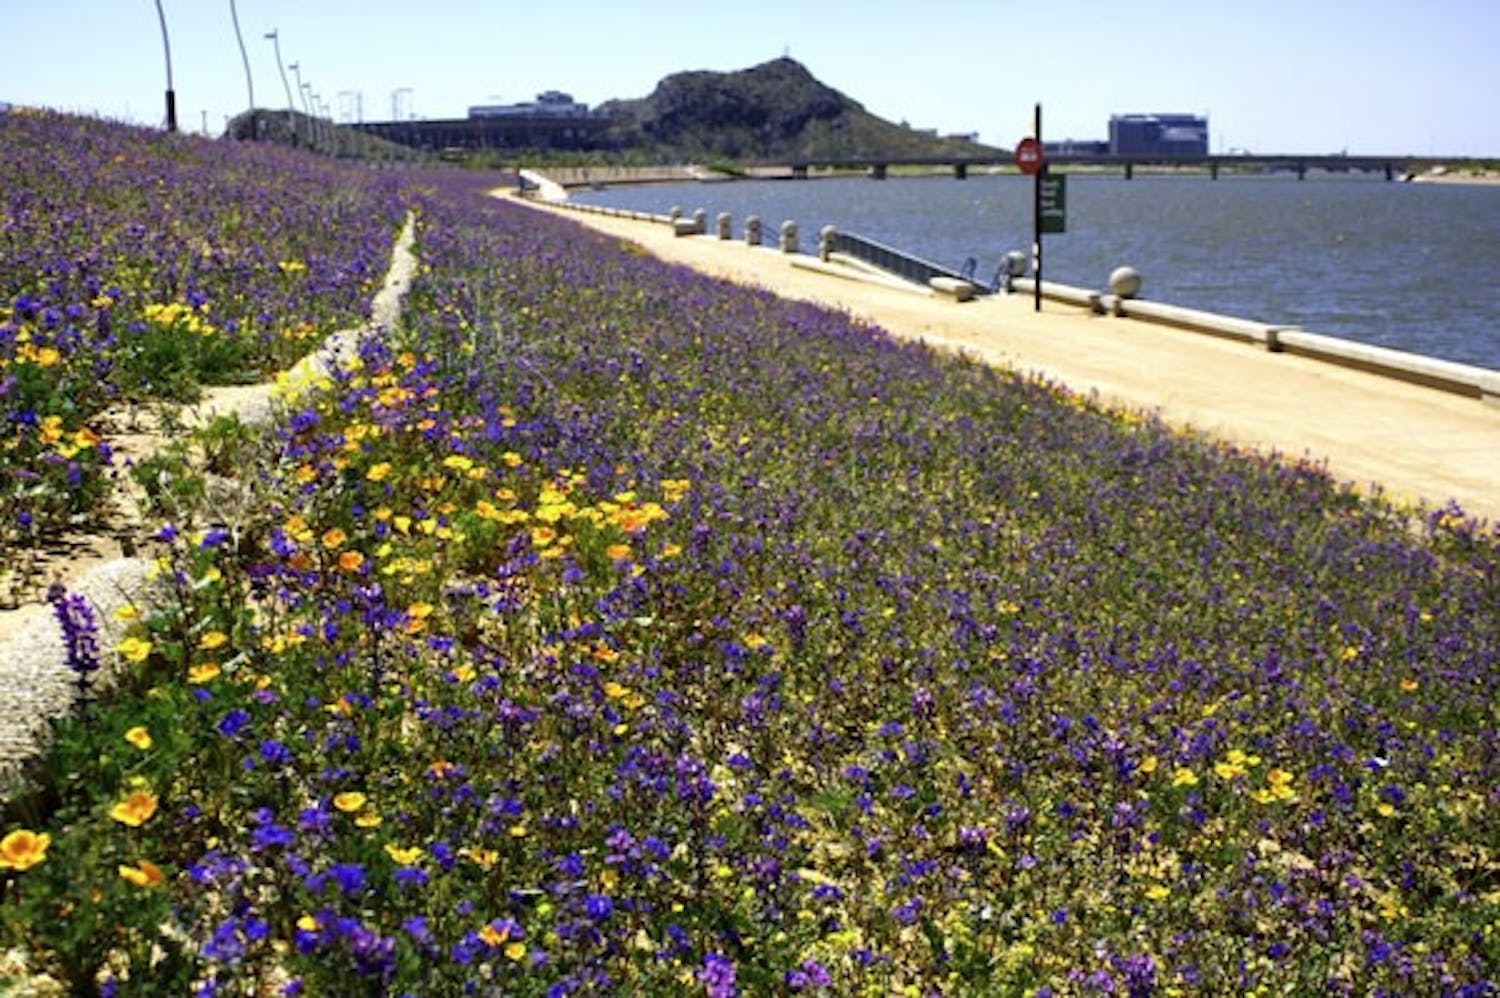 PICKING WILDFLOWERS: Over a half mile of the South bank of Tempe Town Lake is cover by spring blooming wildflowers. (Photo by Scott Stuk)